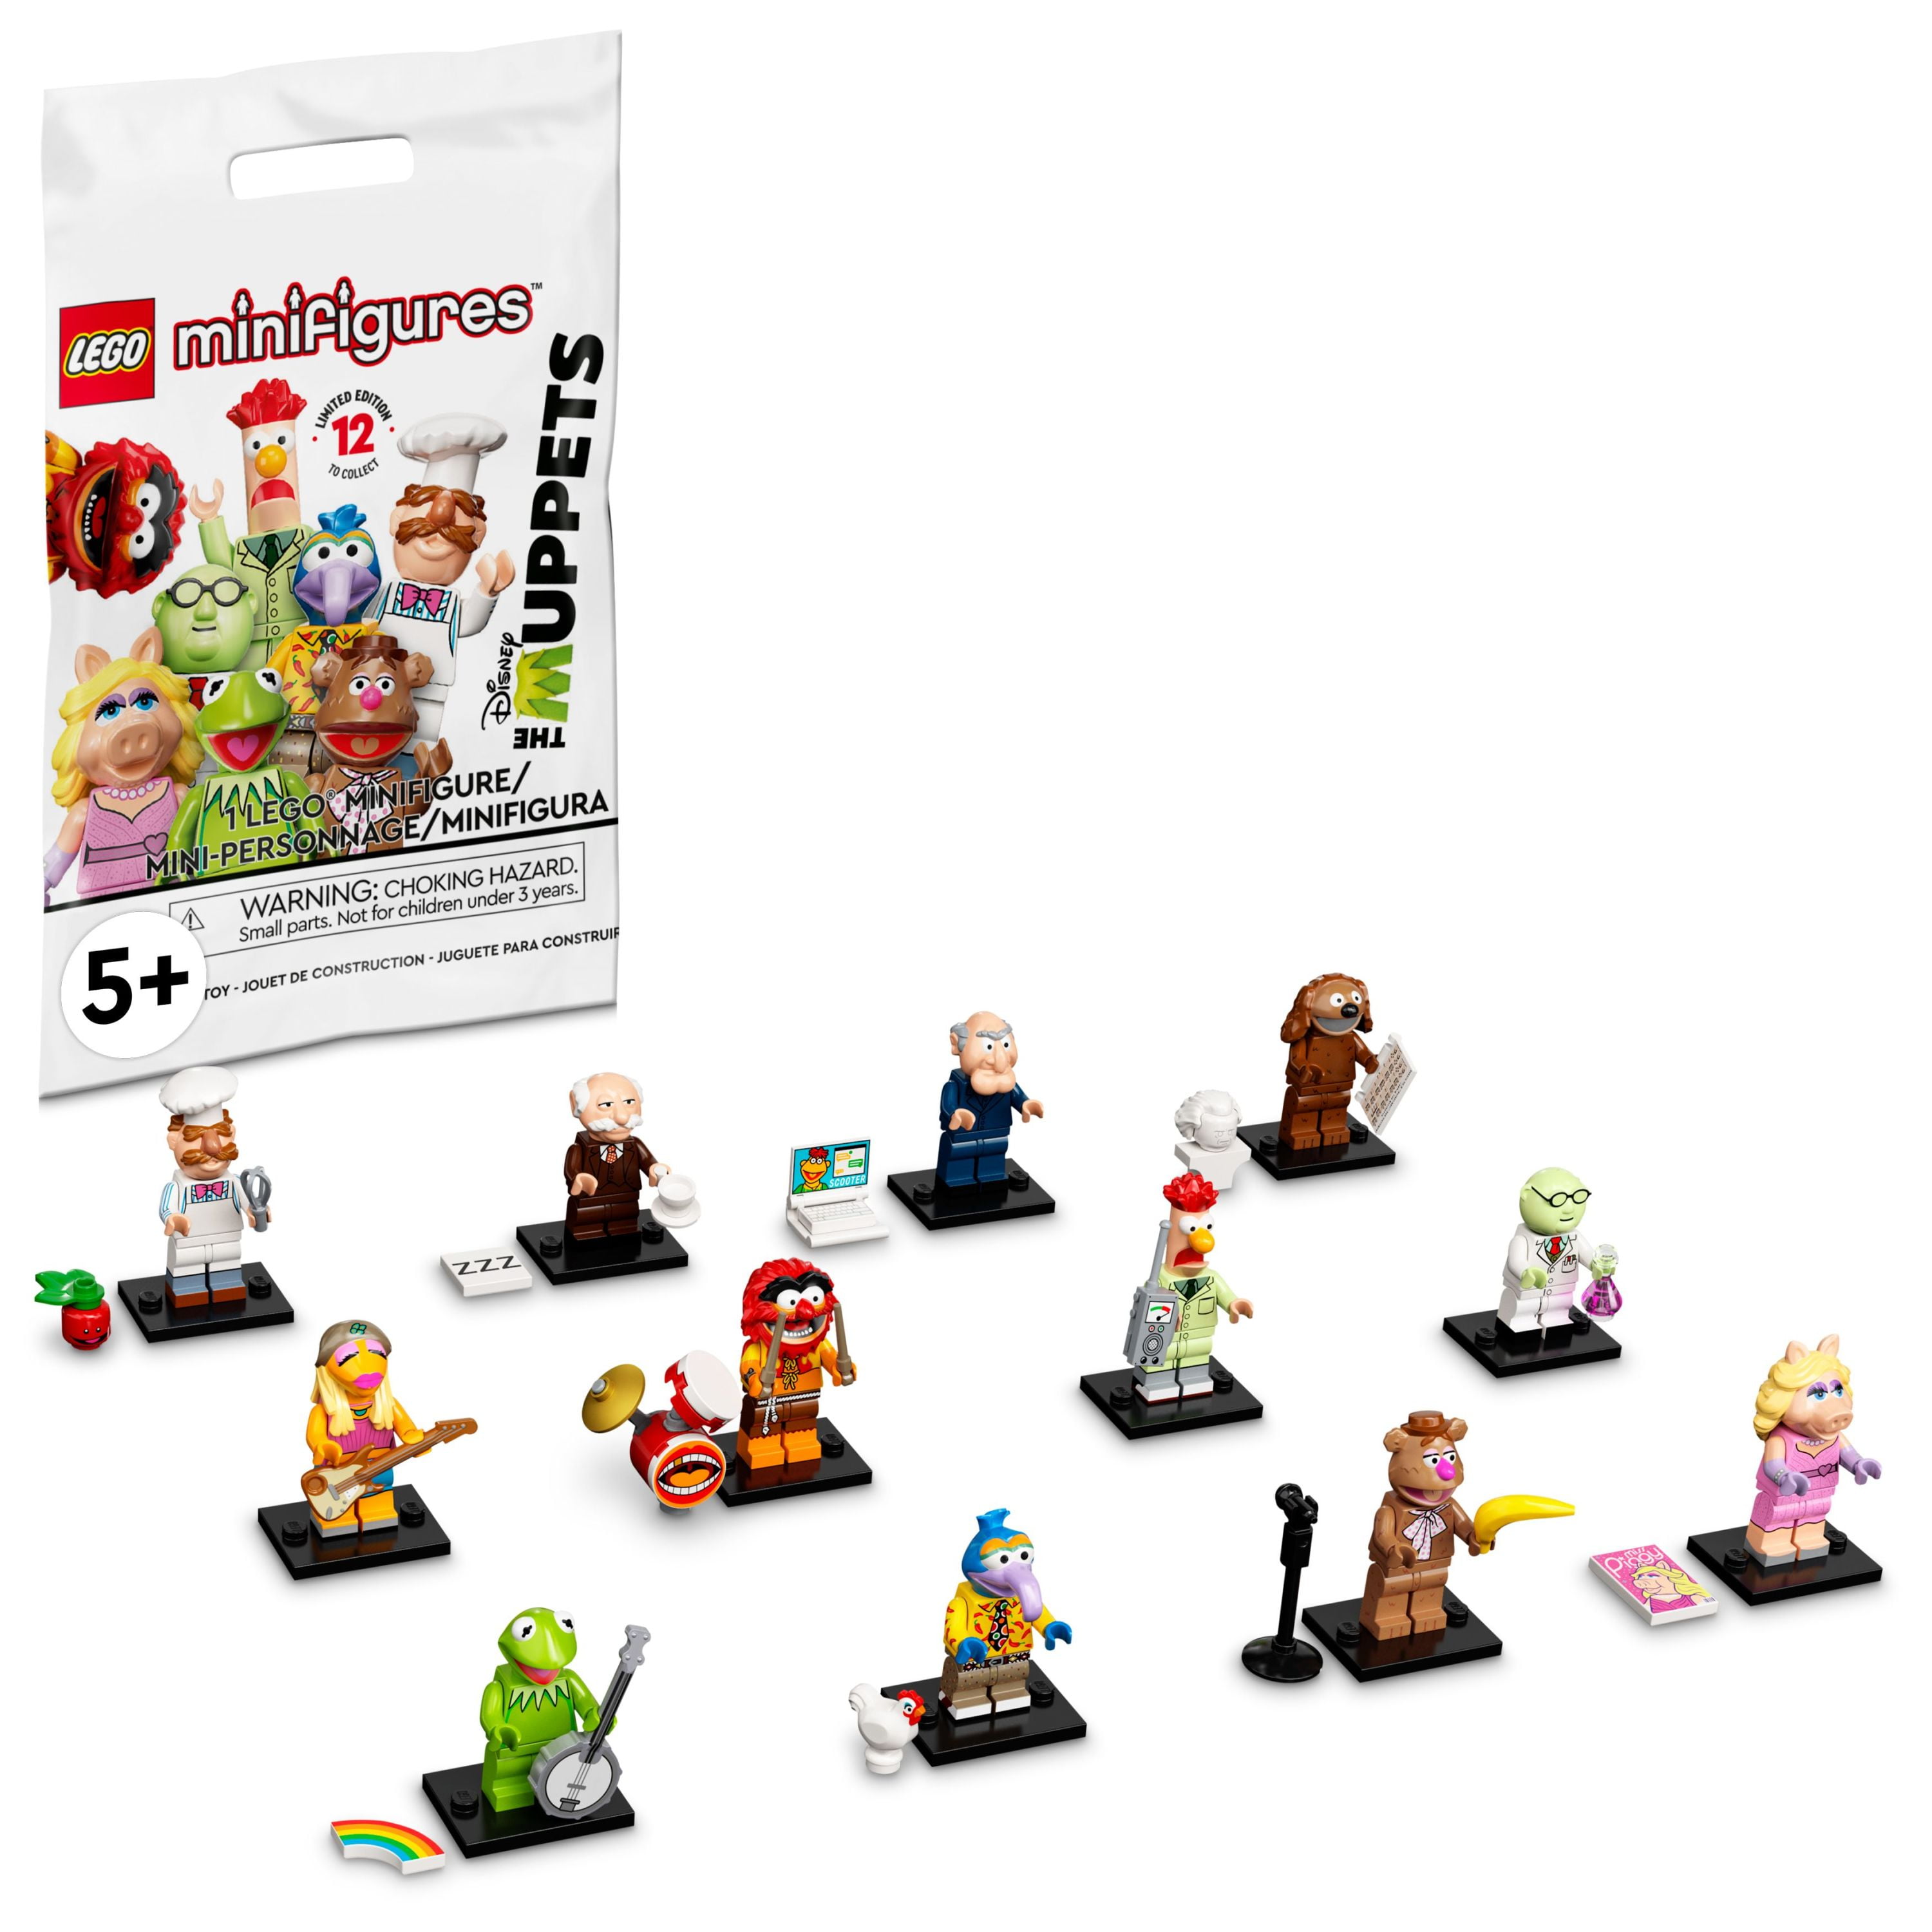 Utensil Accessory Minifigure Not Included. Lego Minifigure Cell Phone X 1 